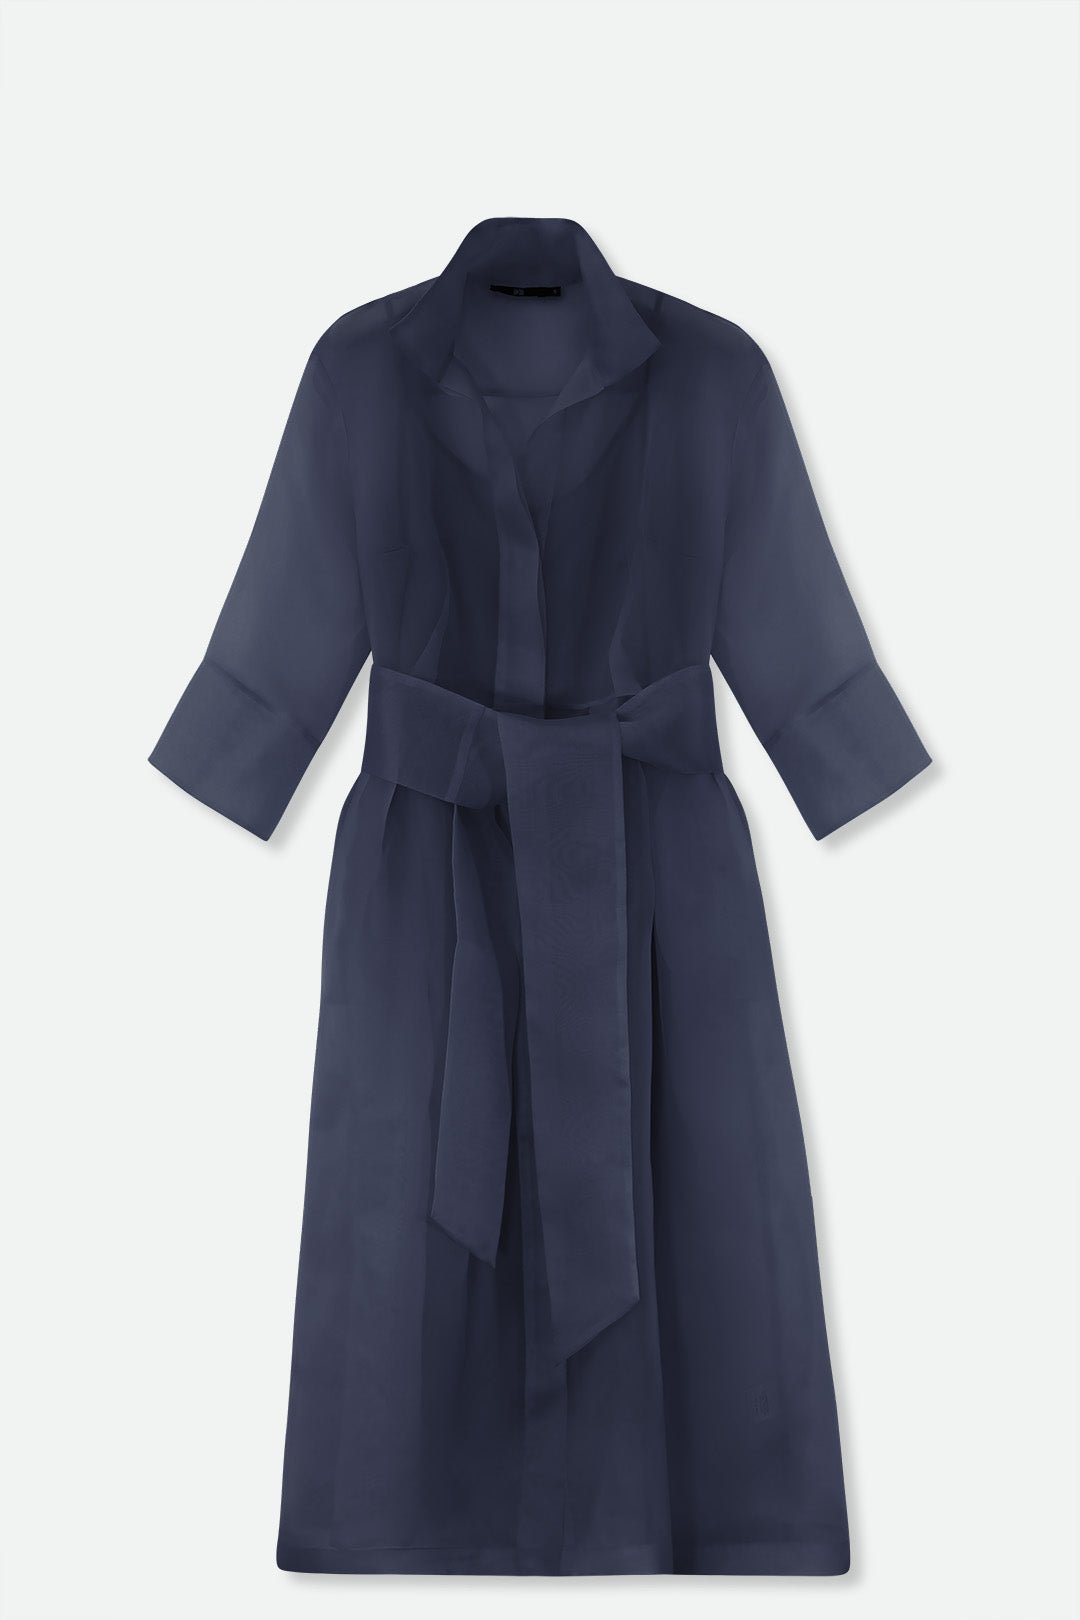 GABRIELLE DRESS IN SILK ORGANZA NAVY - PRE-ORDER AVAILABLE - Jarbo